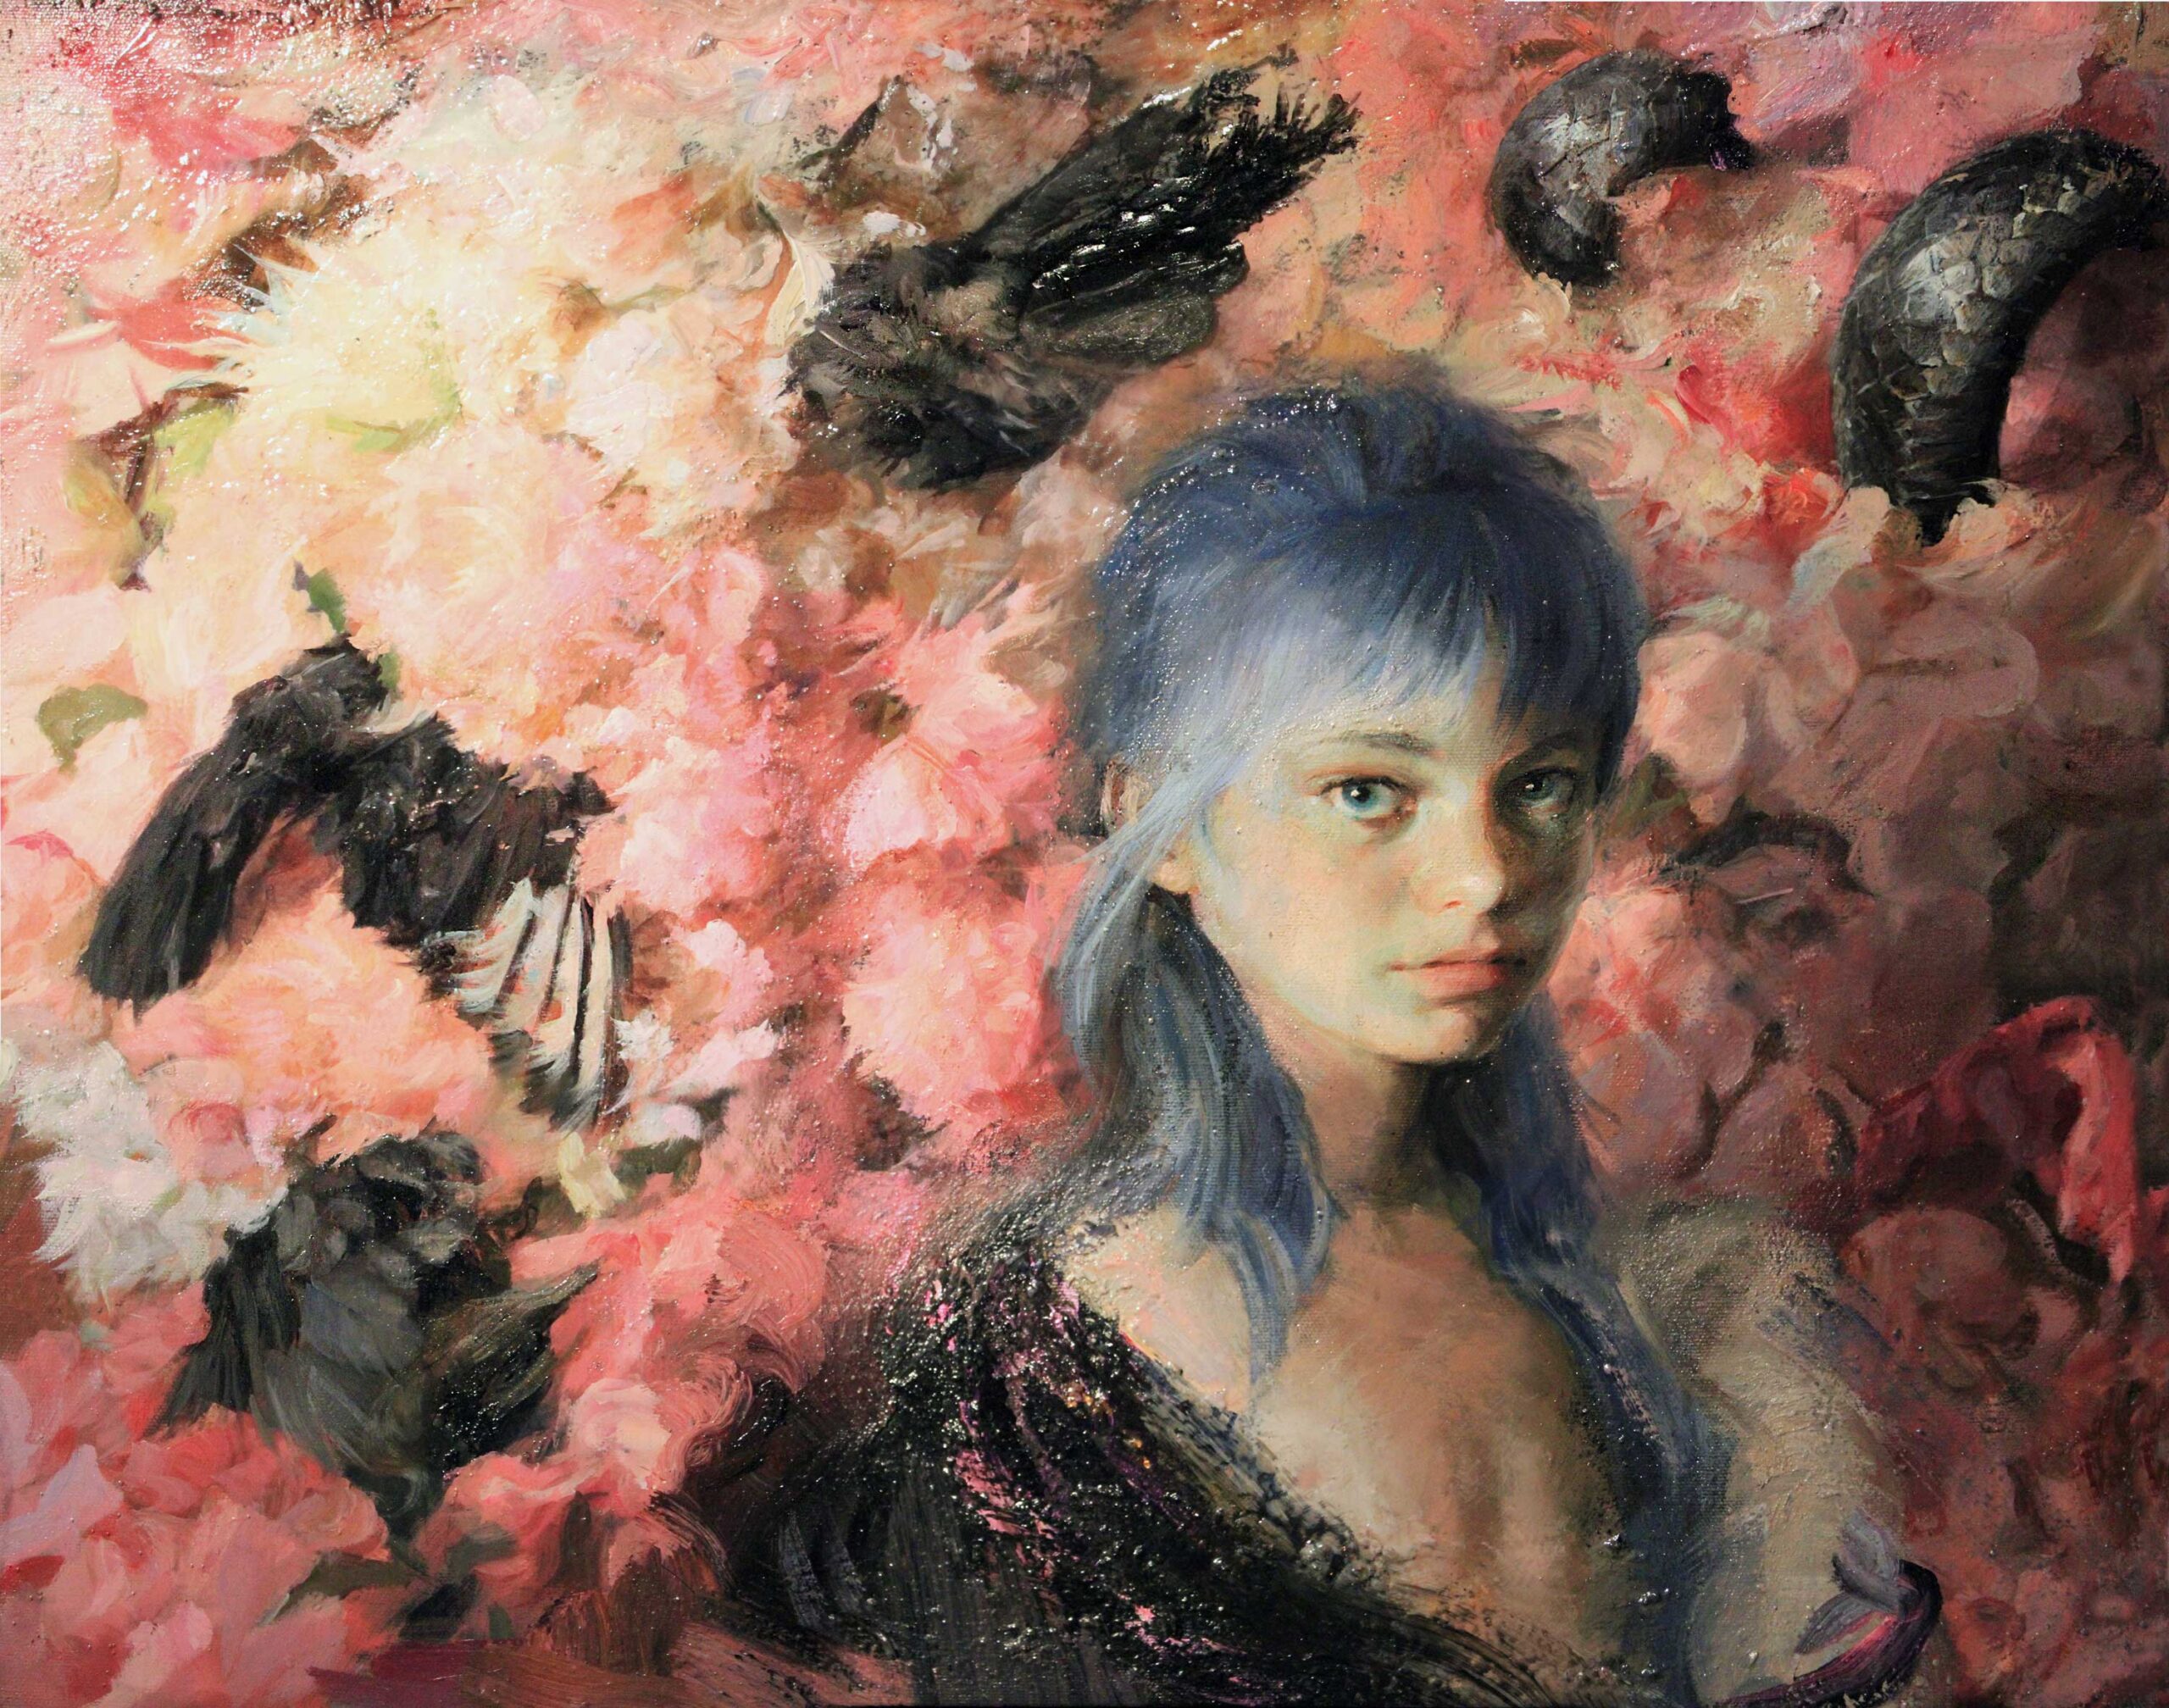 Guillermo Lorca, "The Girl of the Birds," 2018, oil and acrylic on canvas, 19 2/3 x 27 1/2 in., private collection, Chile